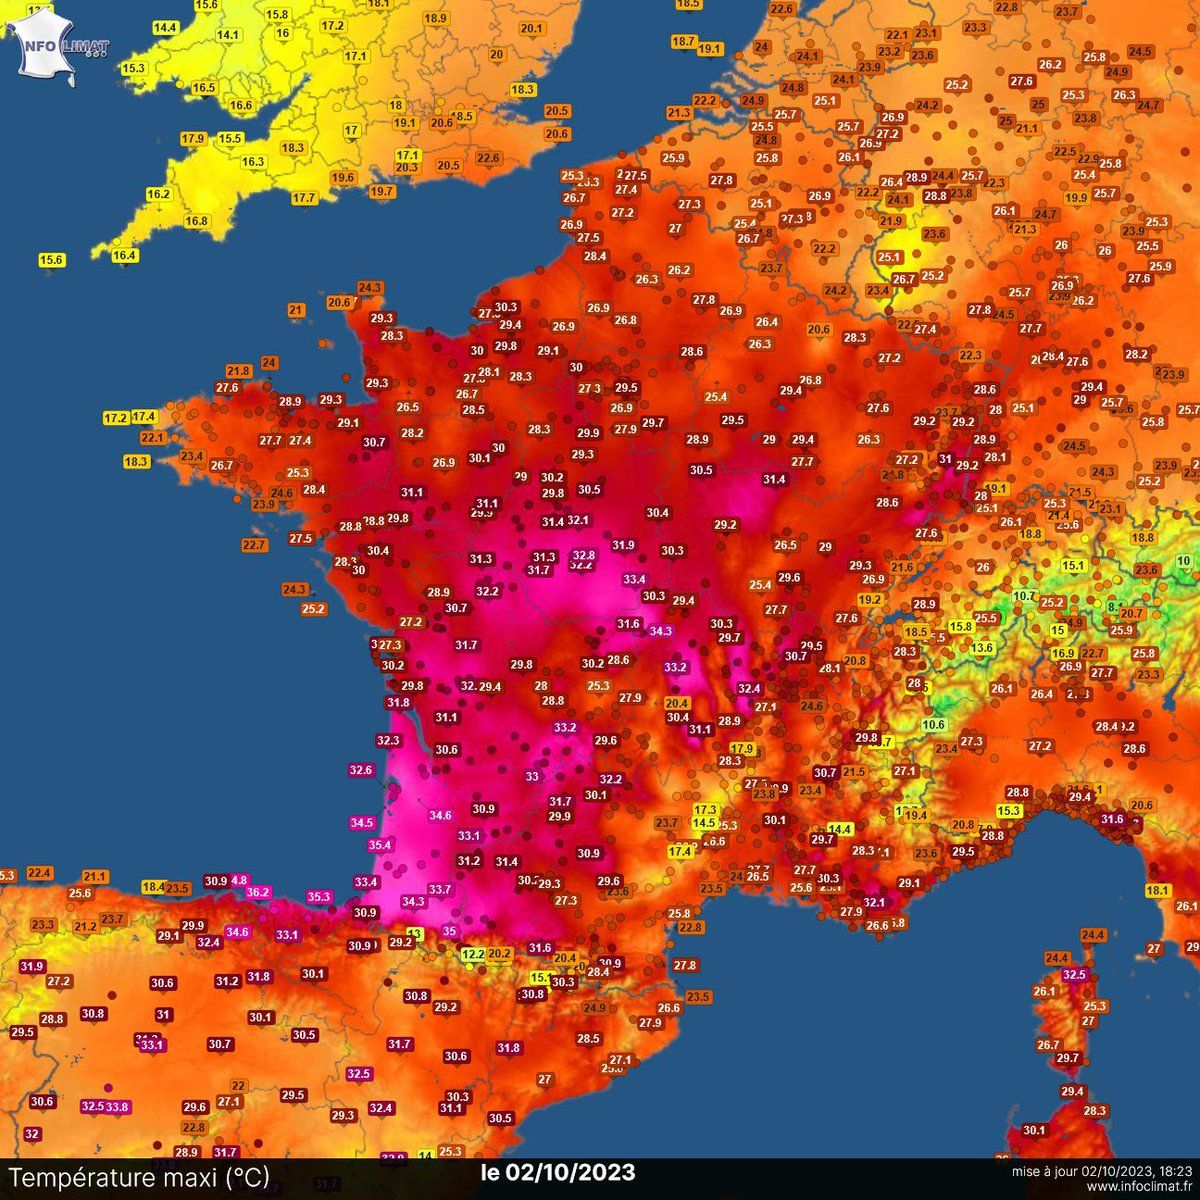 Temperatures in France soared as high as 35.8°C. It was the hottest temperature ever recorded in October in France. To reiterate - it was 35.8°C in France in OCTOBER! There is no time to wait. #ActOnClimate #climate #energy #endfossilfuels